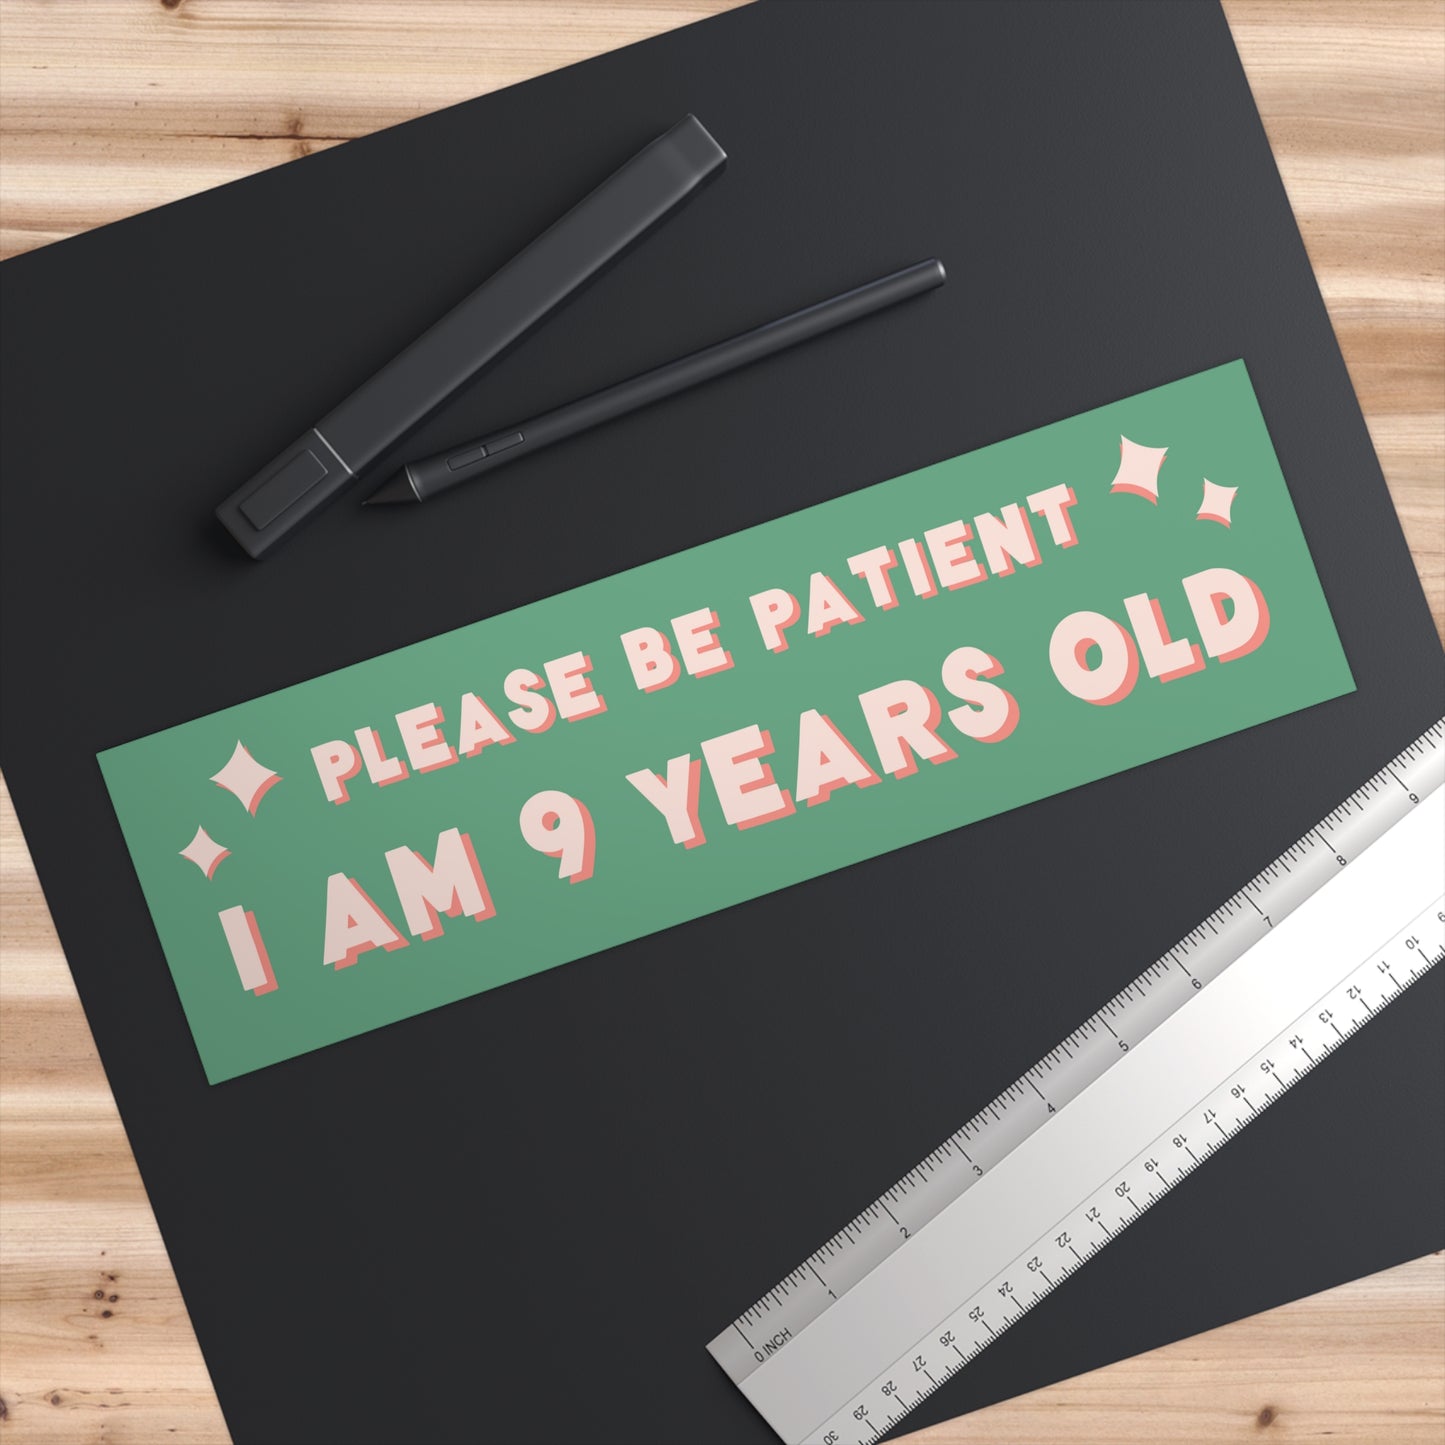 Please Be Patient I Am 9 Years Old Bumper Sticker